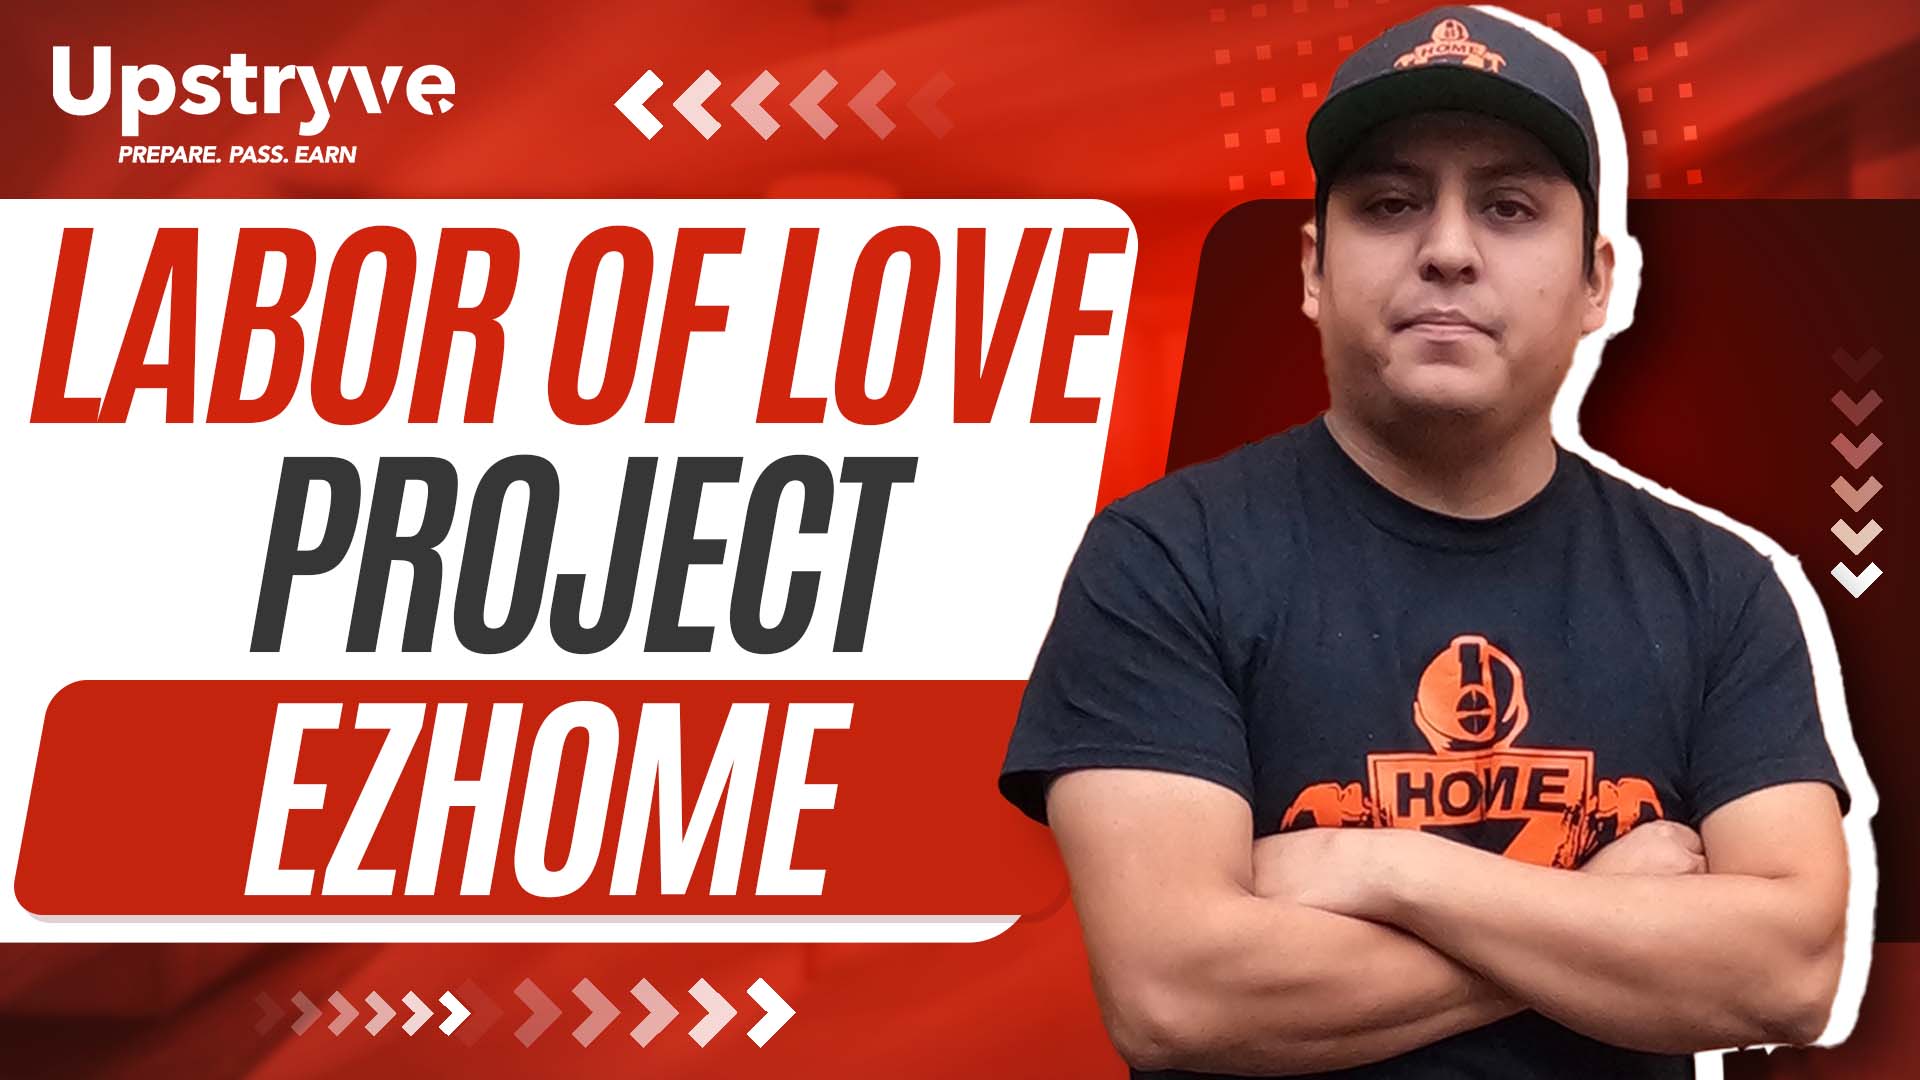 Labor Of Love - Helping Others One Job At A Time
Eduardo "EZHome" Lopez is a General Contractor who during the last year and a half has built a following of over 1.6 million people on TikTok alone. He decided that he was going to use this platform for good and created his project Labor of Love. The Labor of Love project is all about helping those in need. 

Eddy drives around his local area looking for homes that need repairs and surprise the homeowners with a free repair. This whole process is sponsored by Upstryve, Lowes, OX Tools, and a few other organizations that loved the idea. This process will be filmed and shared across Eddy's multiple social media pages so make sure to follow along.